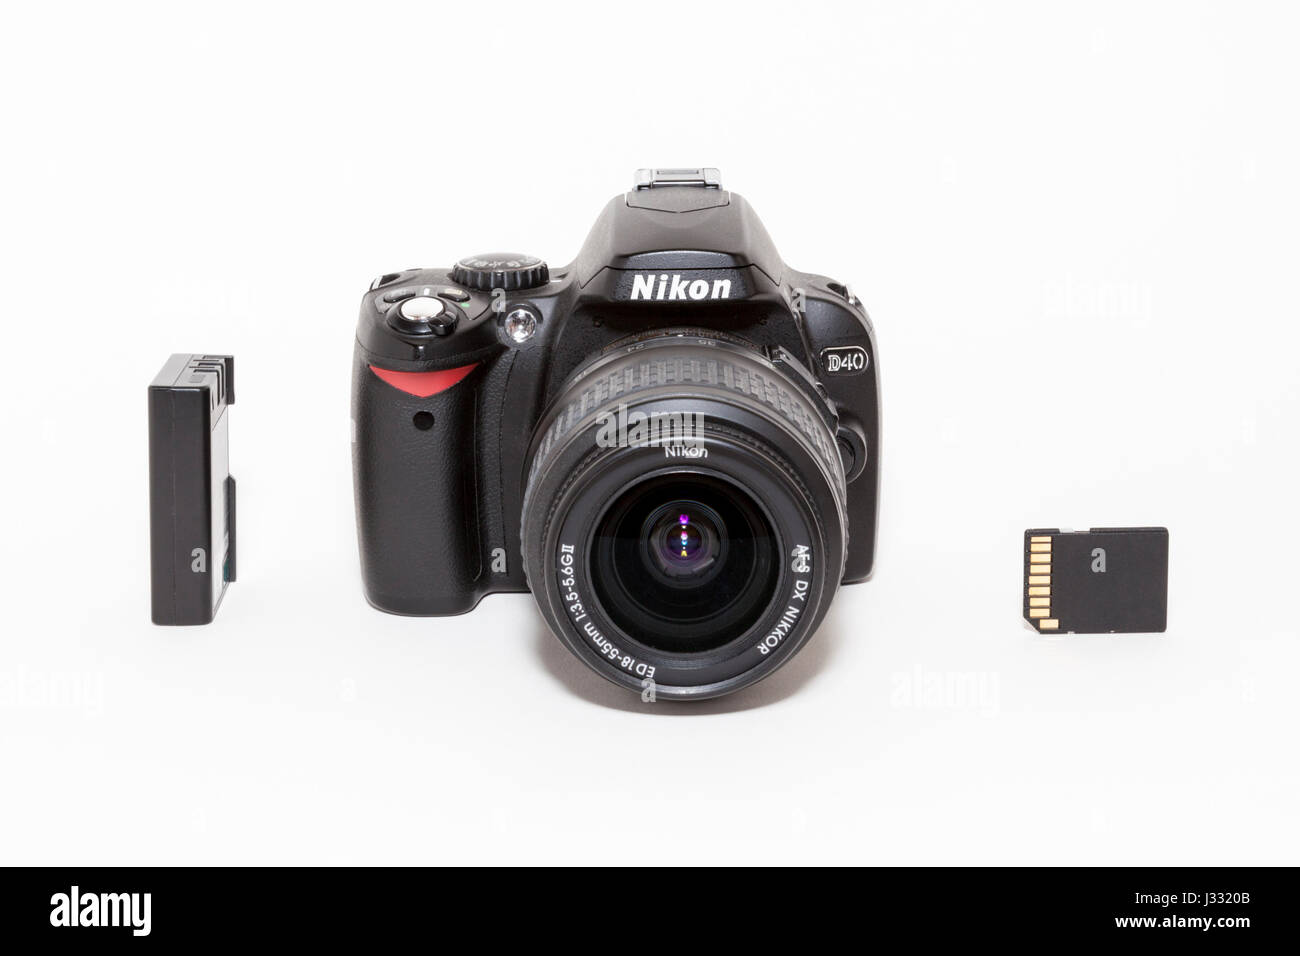 35mm Nikon D40 DSLR camera with battery and SD card on a white background  Stock Photo - Alamy